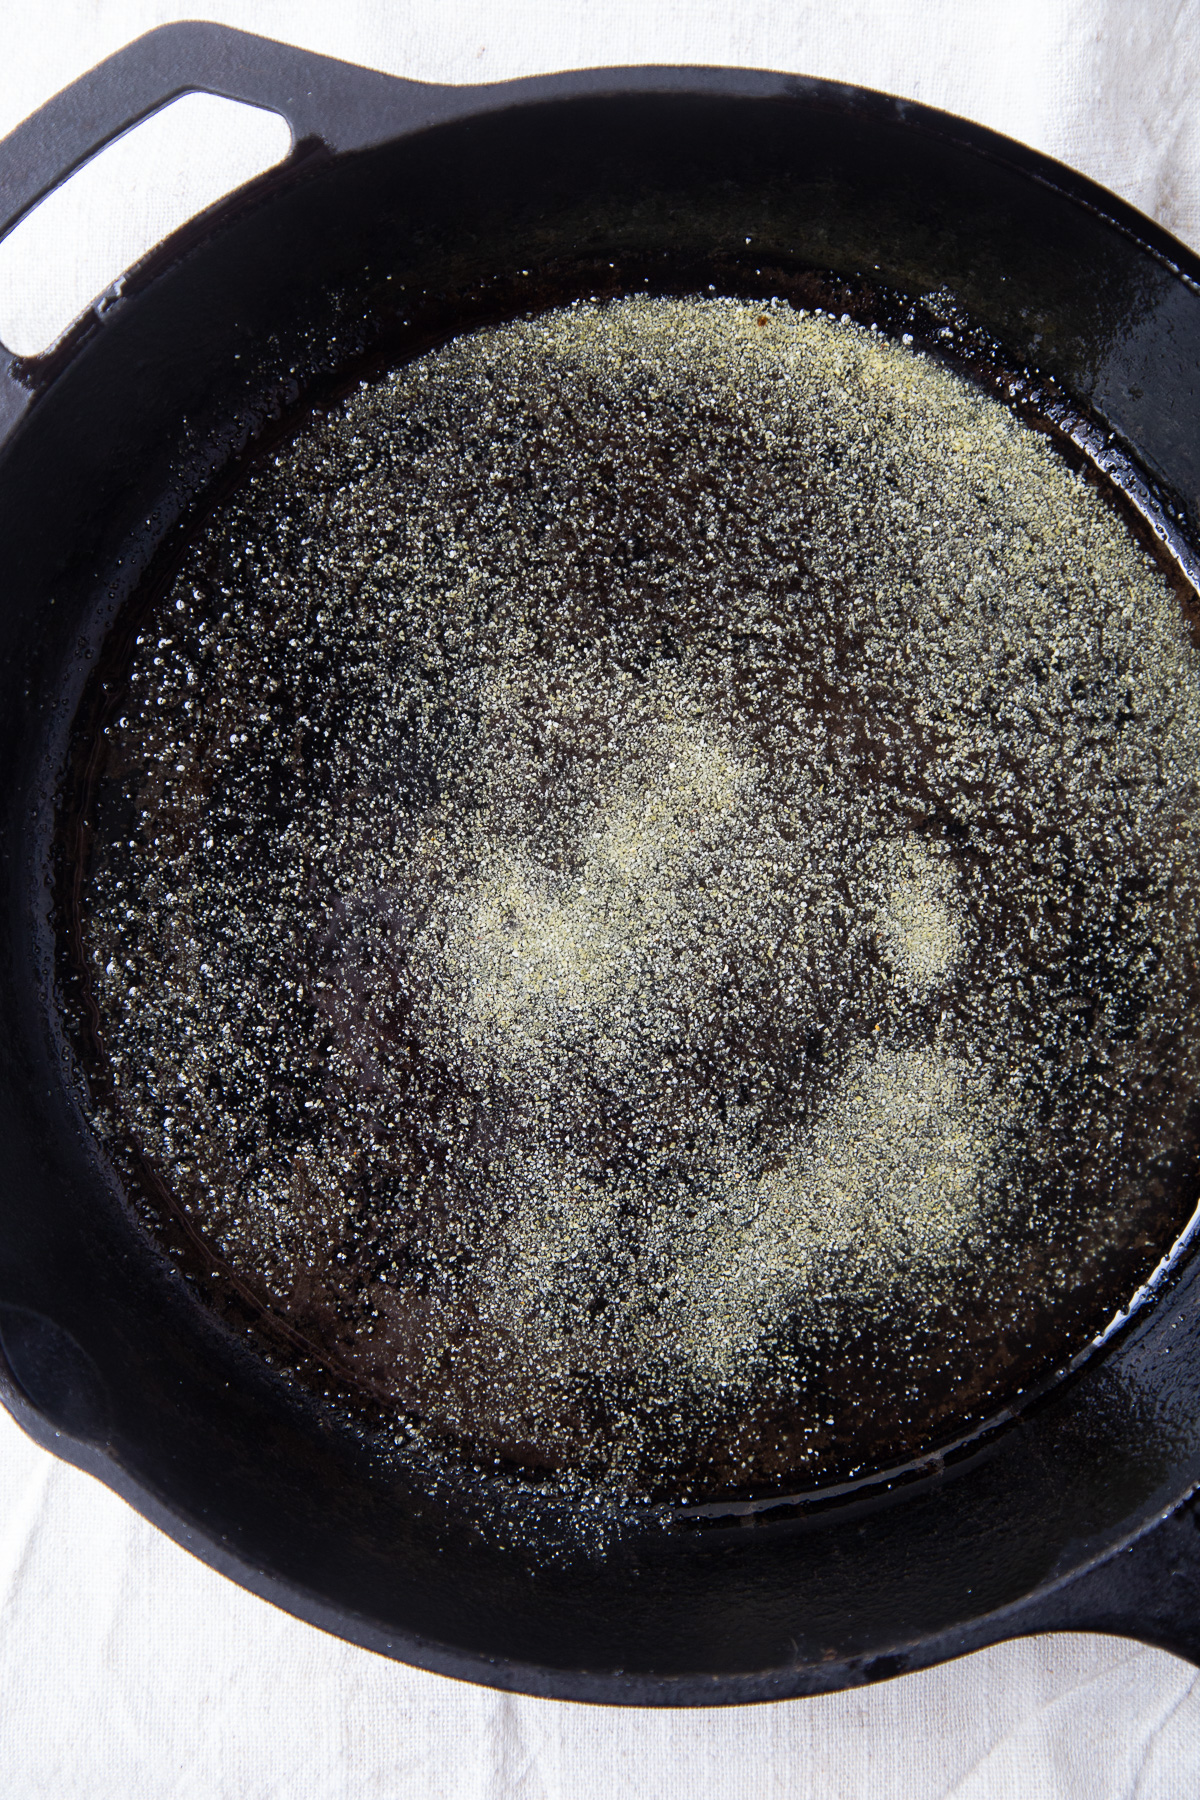 cornmeal and oil in a cast iron pan